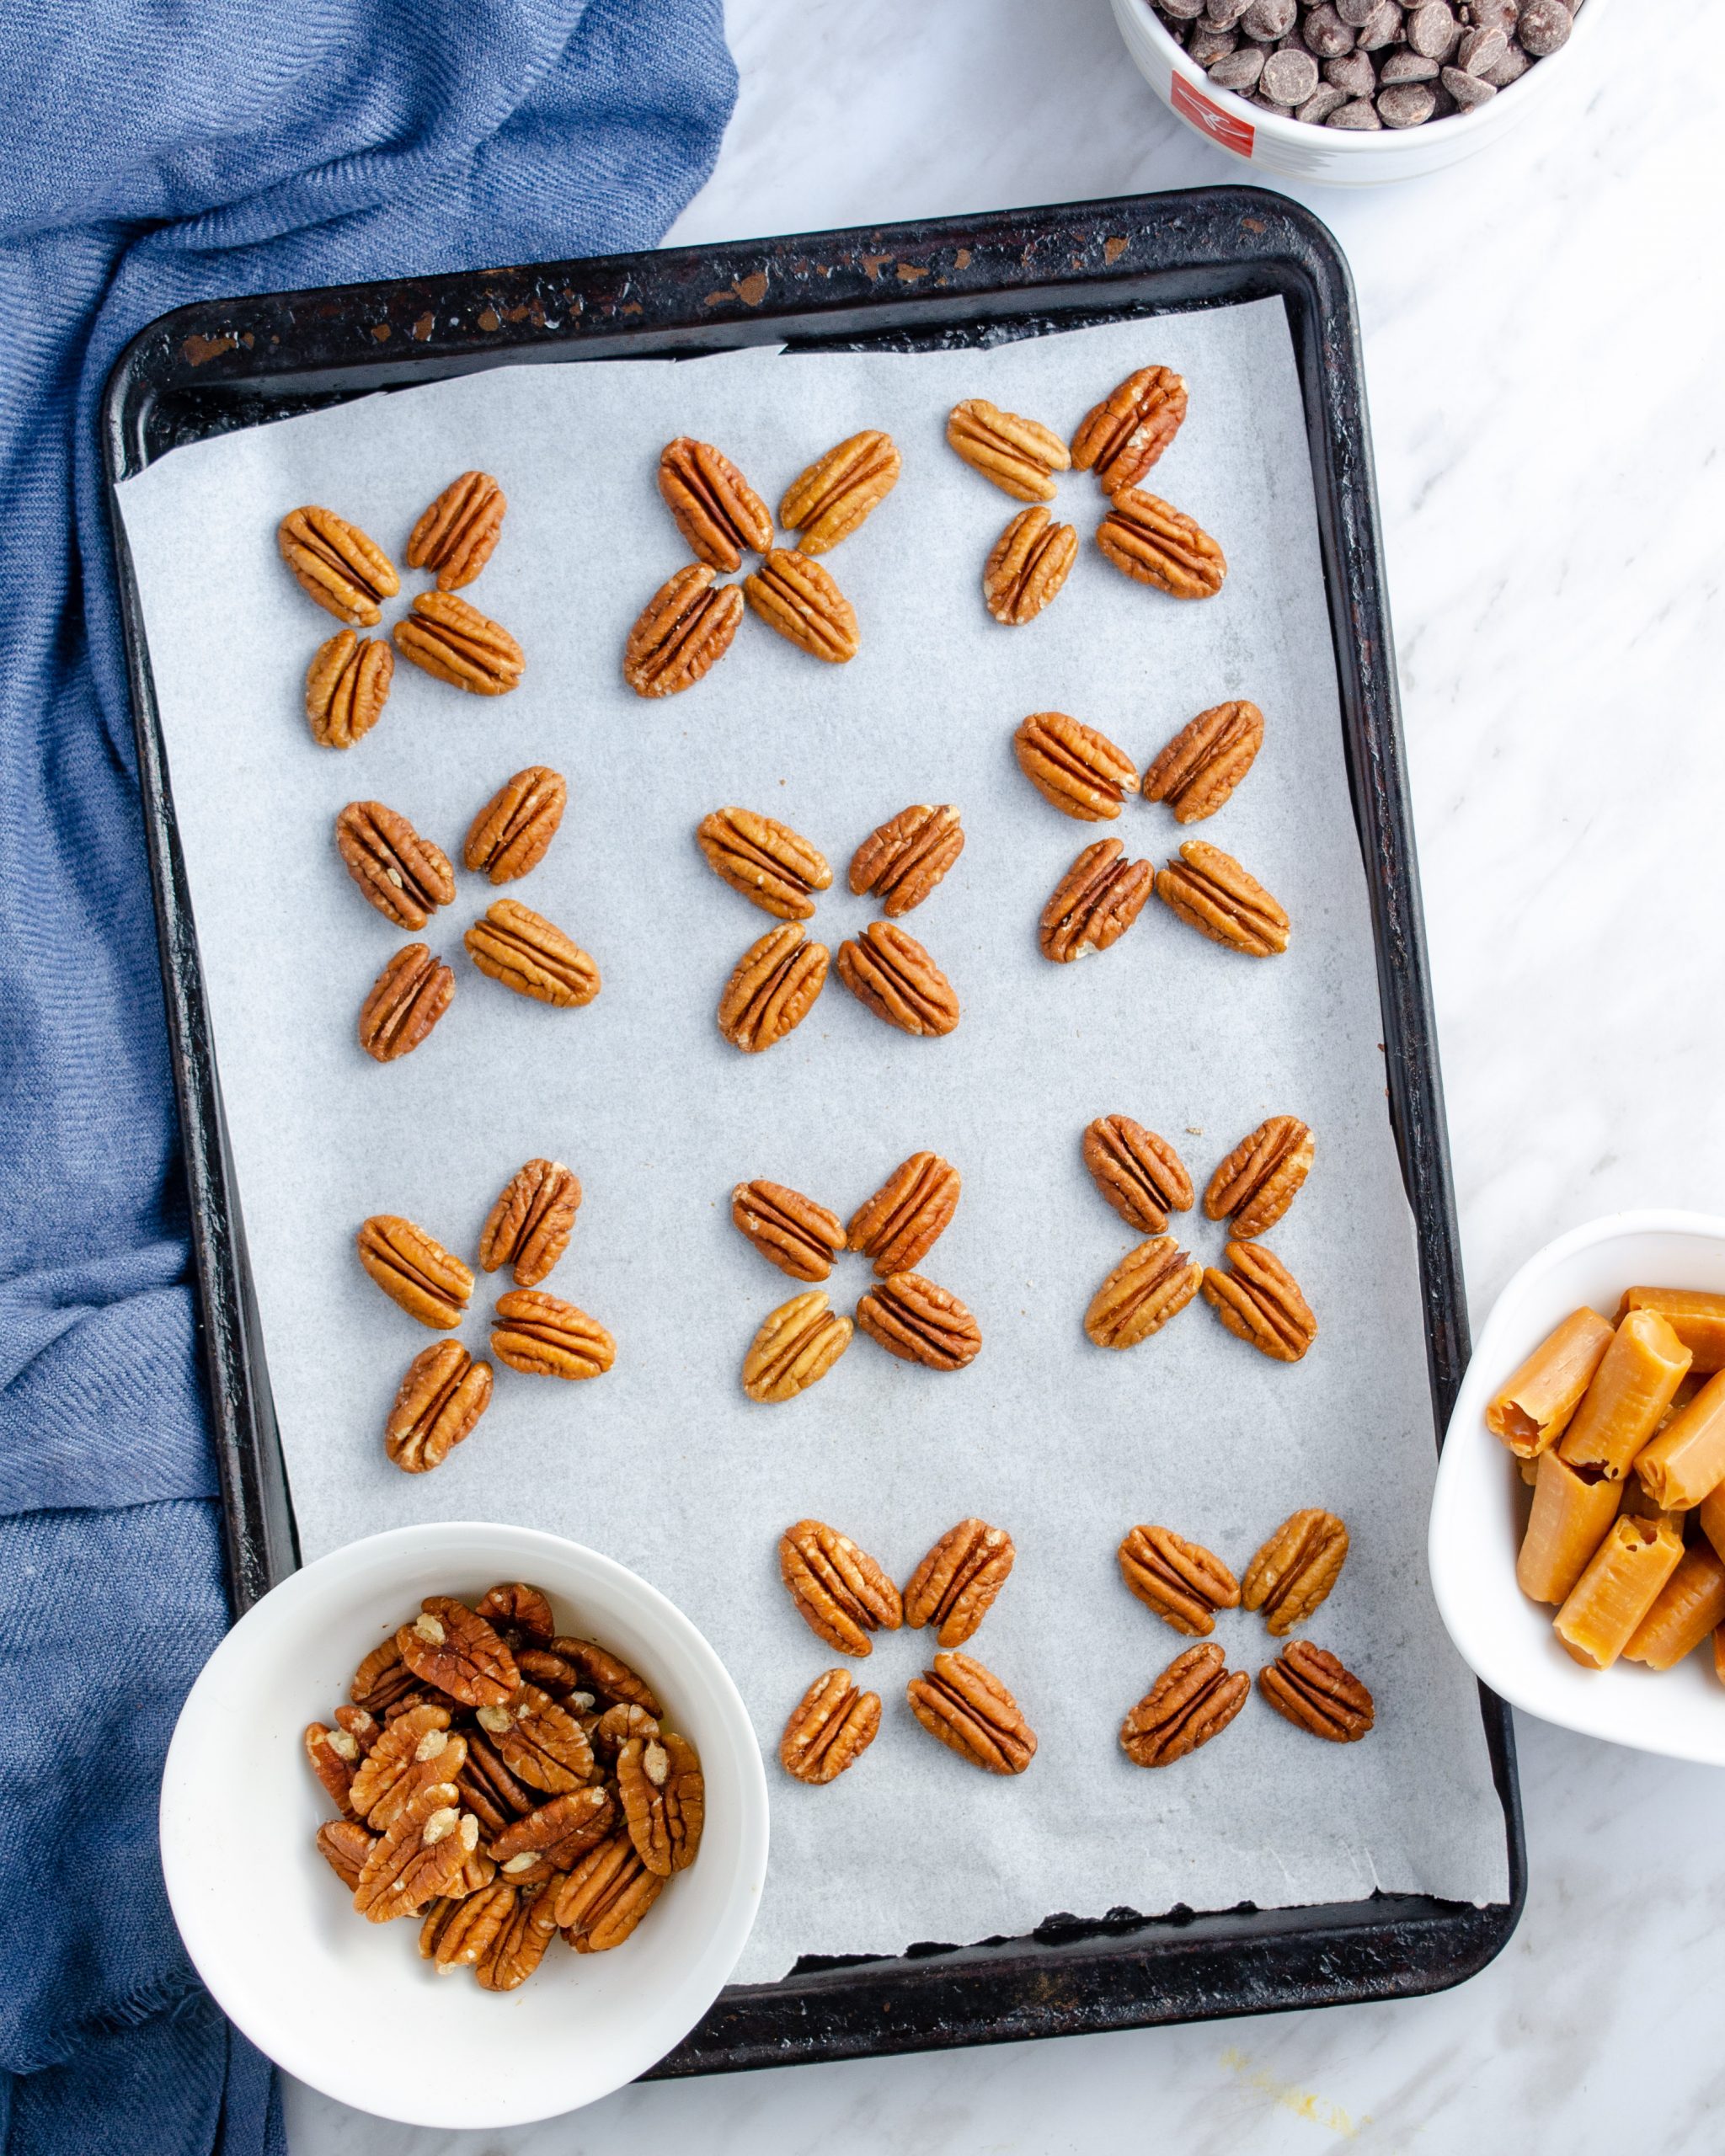 Place the pecan halves flat side down on a parchment or silicone baking mat-lined baking sheet. Separate them into sets of four, and form them into cross or “x” shapes. Leave some room between each set of four pecan halves. These will be the base for your turtle candies.